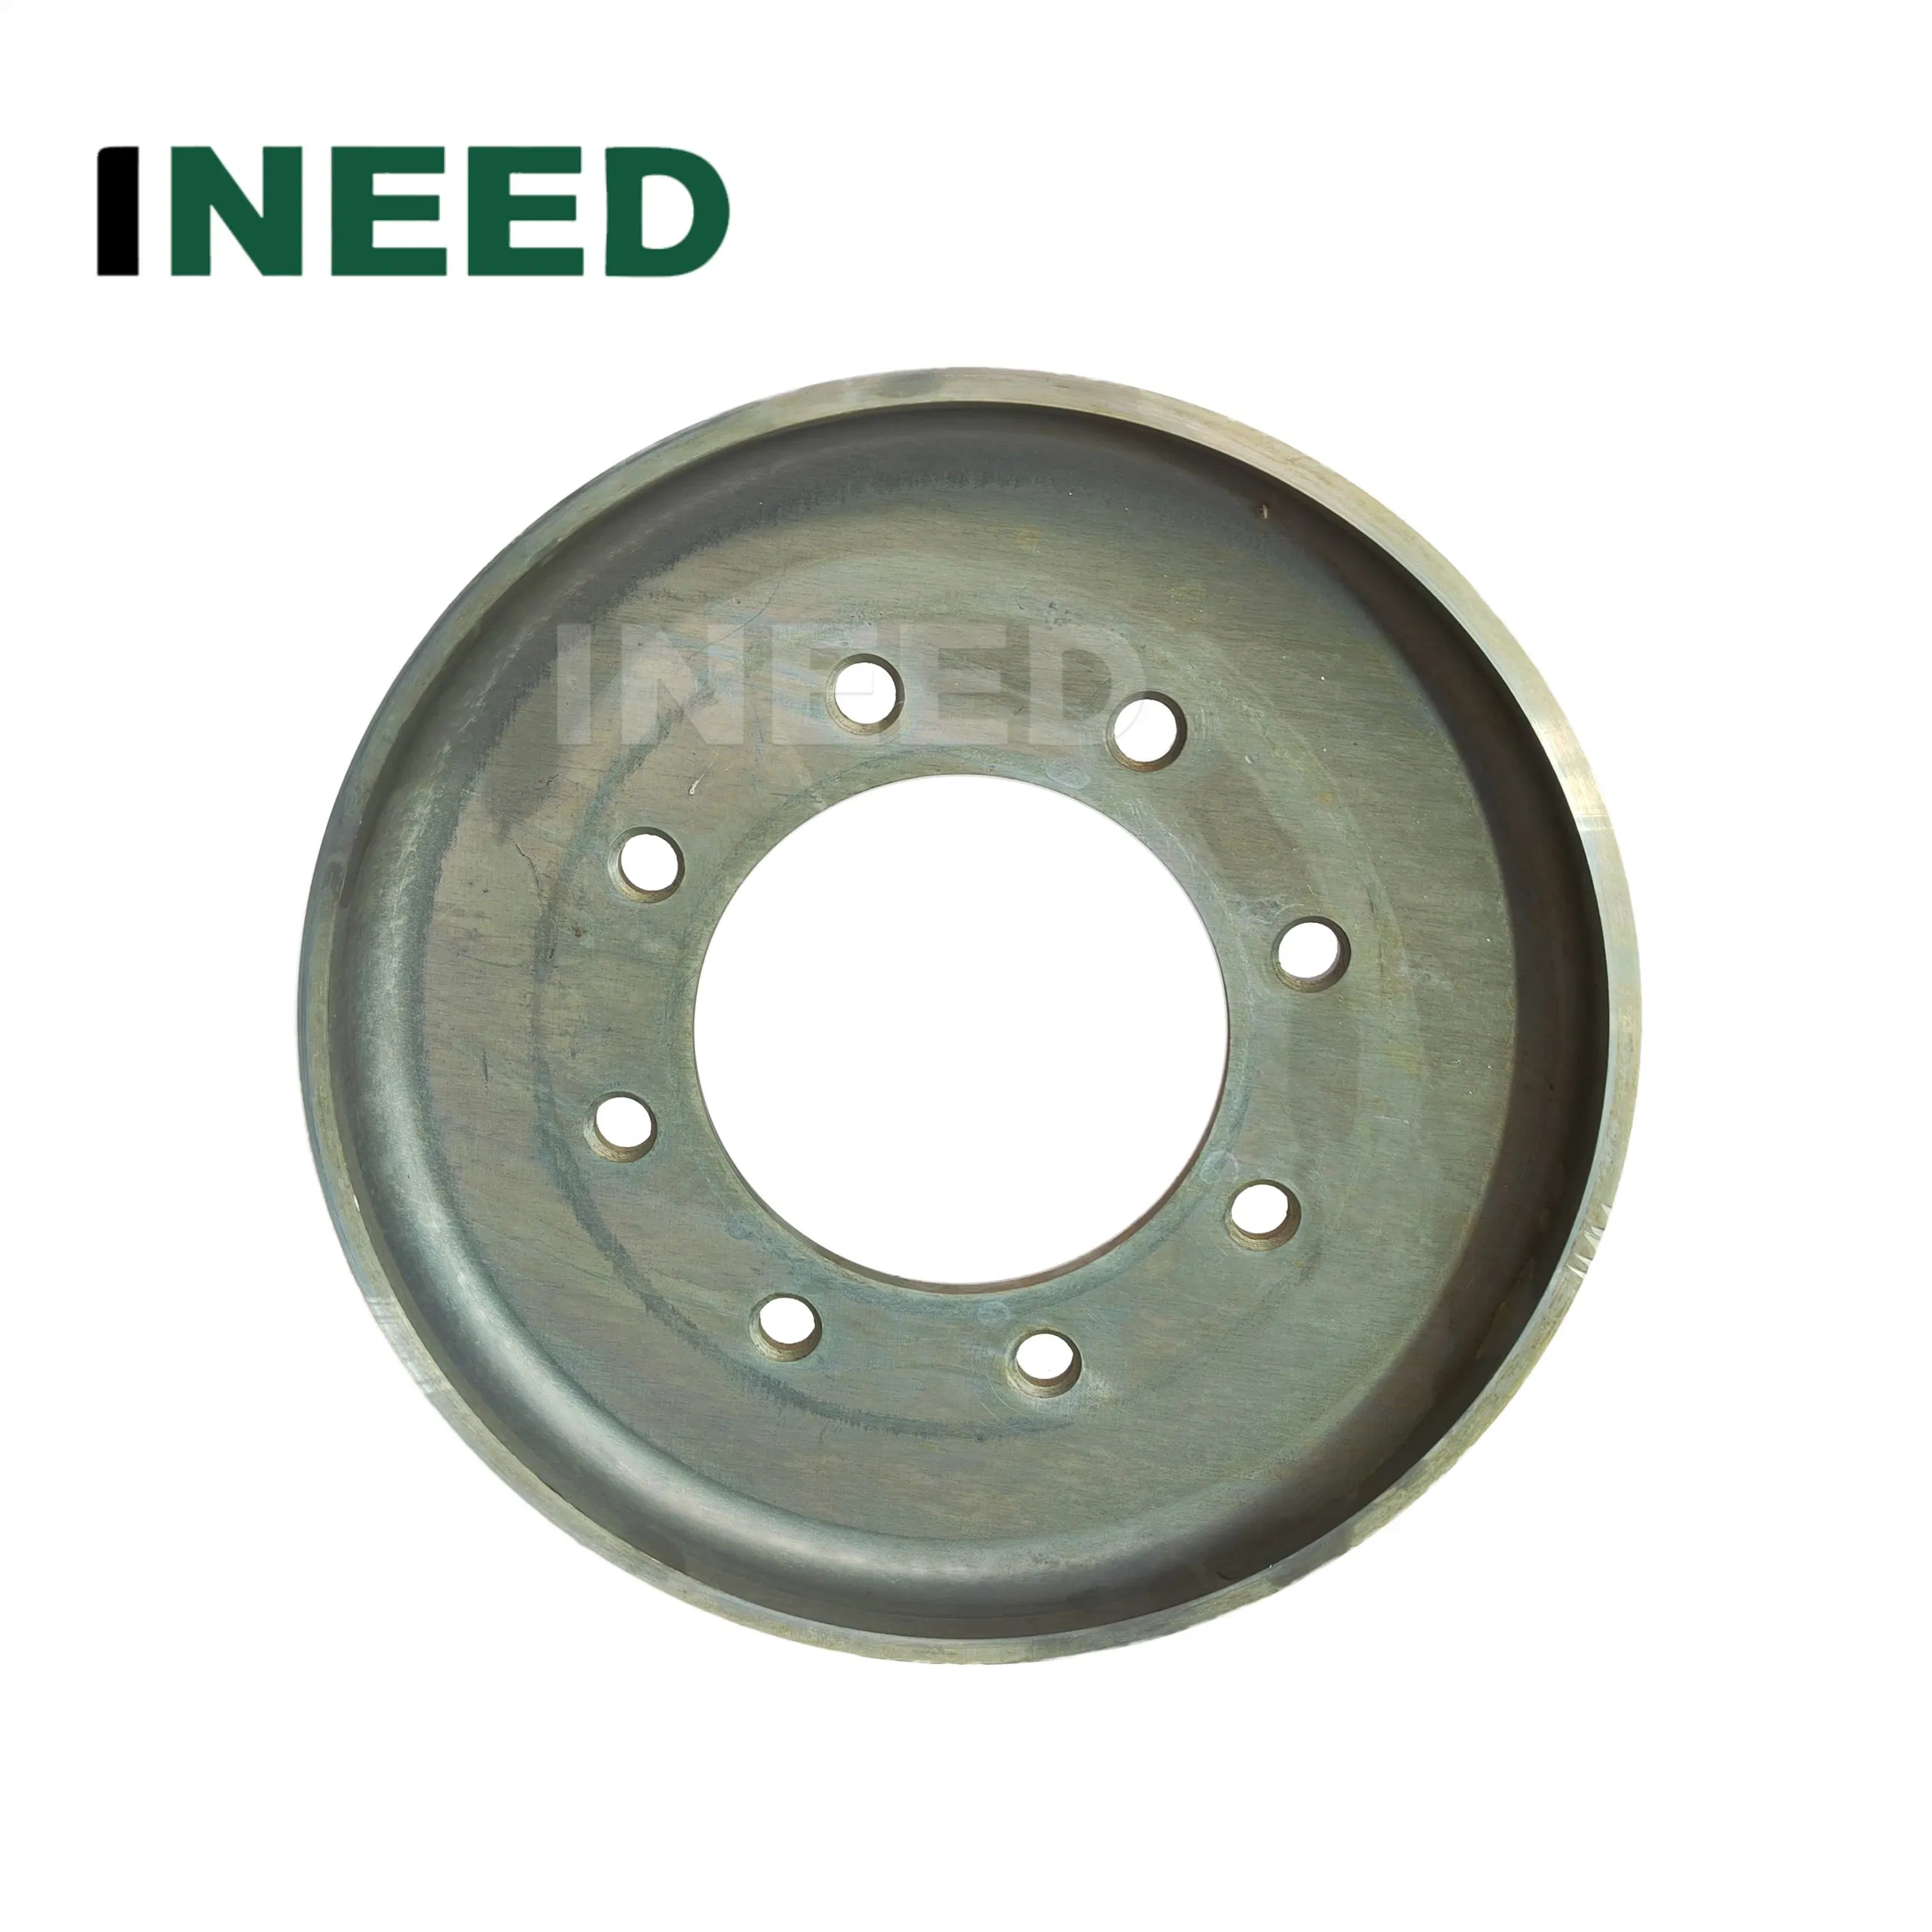 Agricultural Industrial Implement Truck Wheel Rim Plate Disc Od610 mm